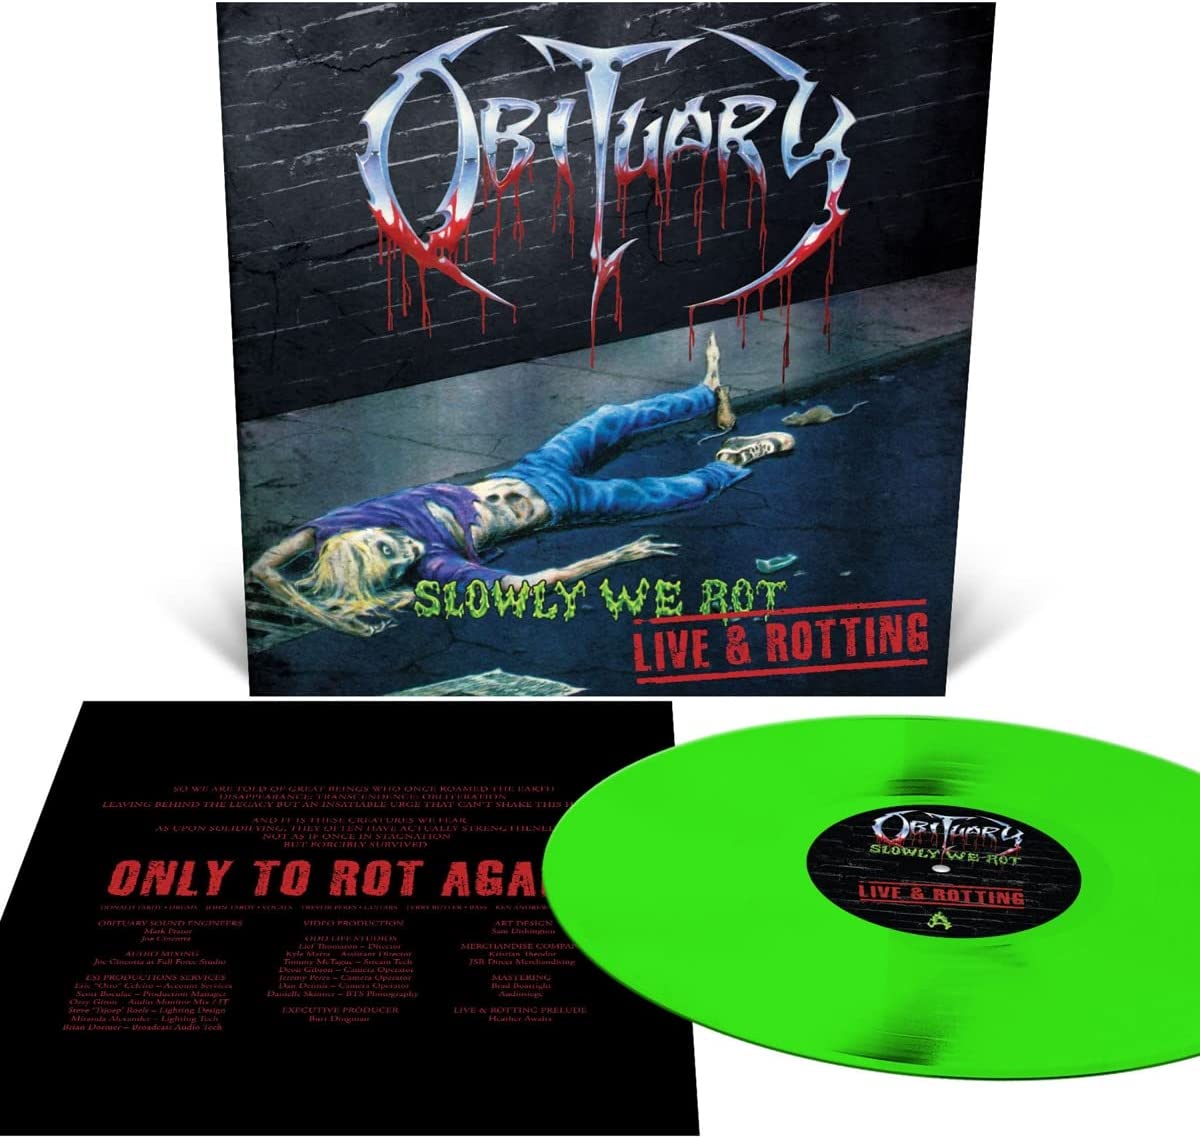 OBITUARY / Cause Of Death - Live Infection (LP/Green vinyl)